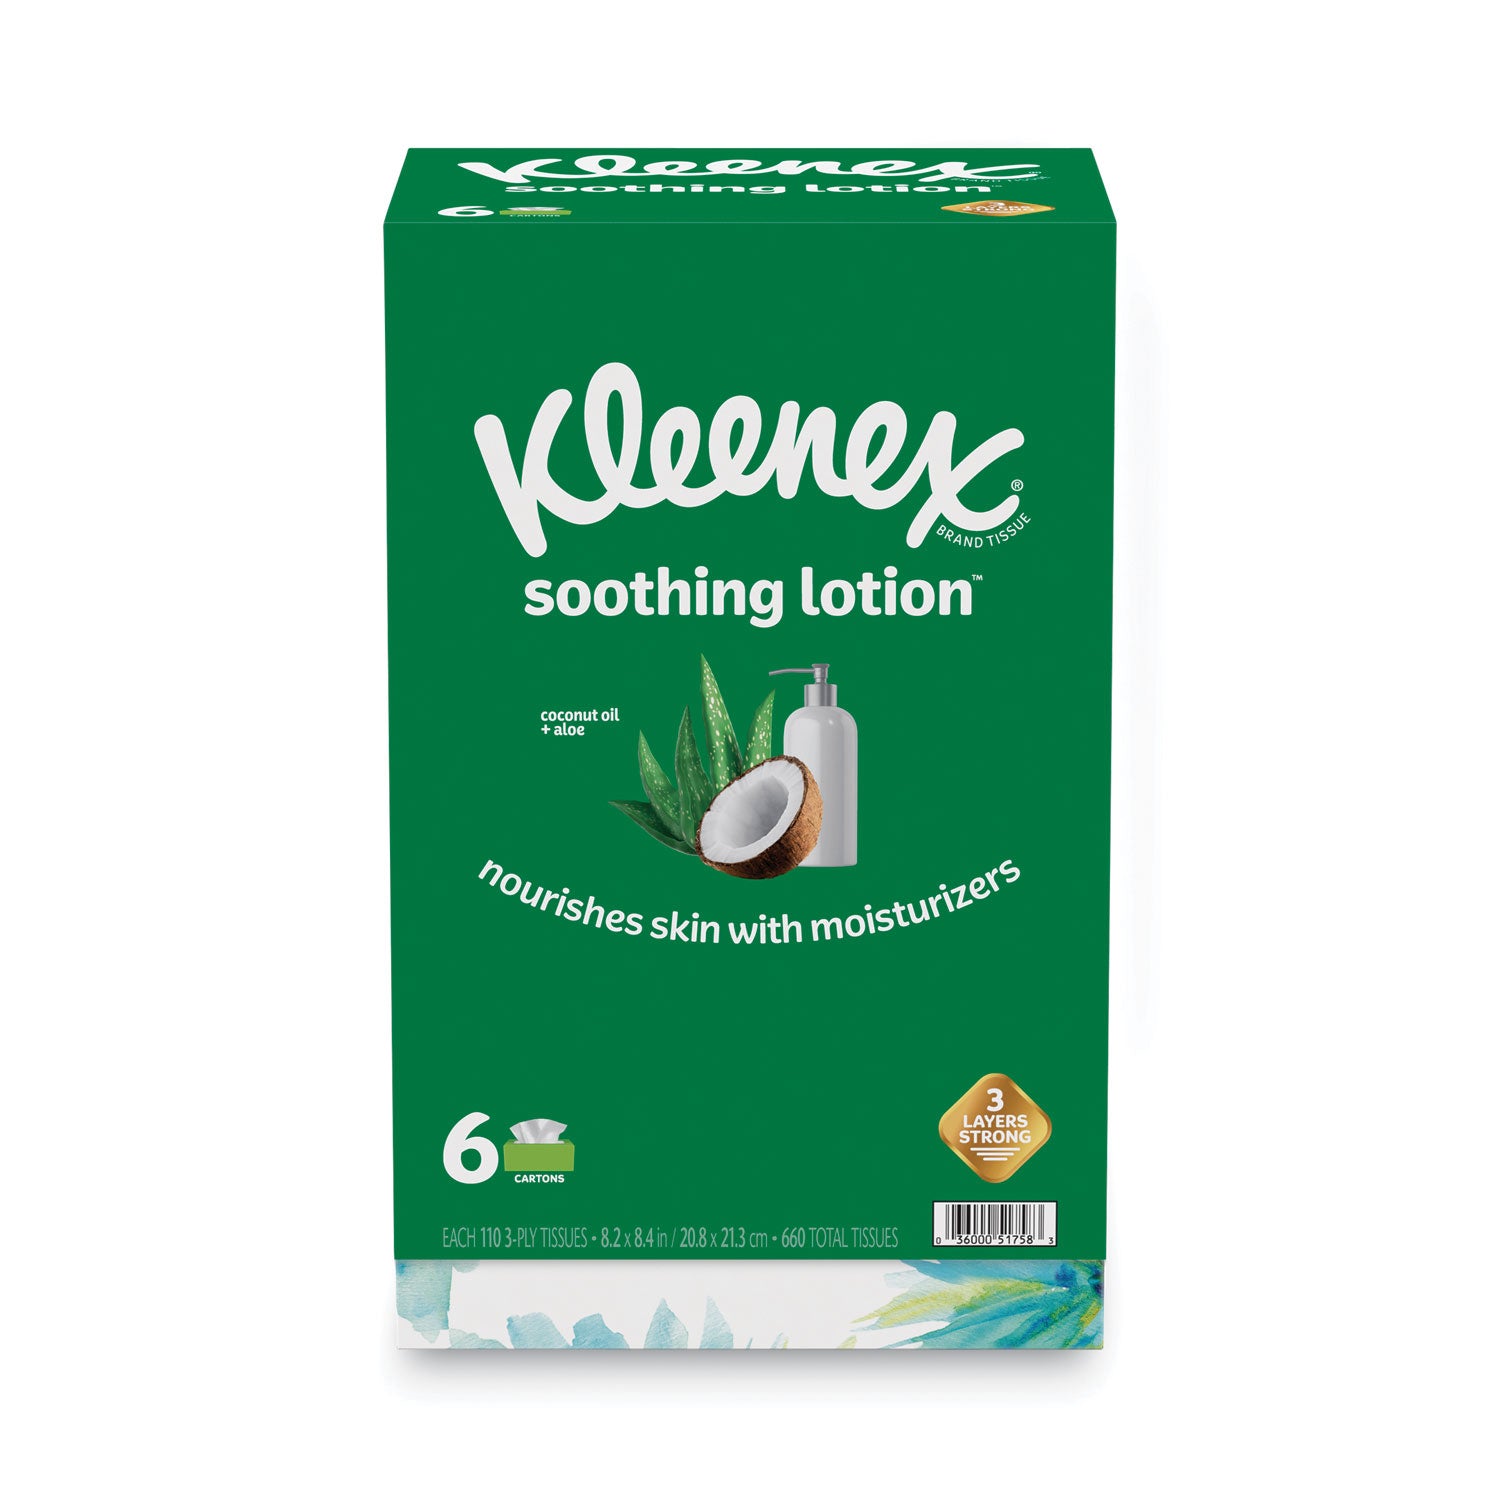 lotion-facial-tissue-3-ply-white-110-sheets-box-6-boxes-pack_kcc51758 - 2